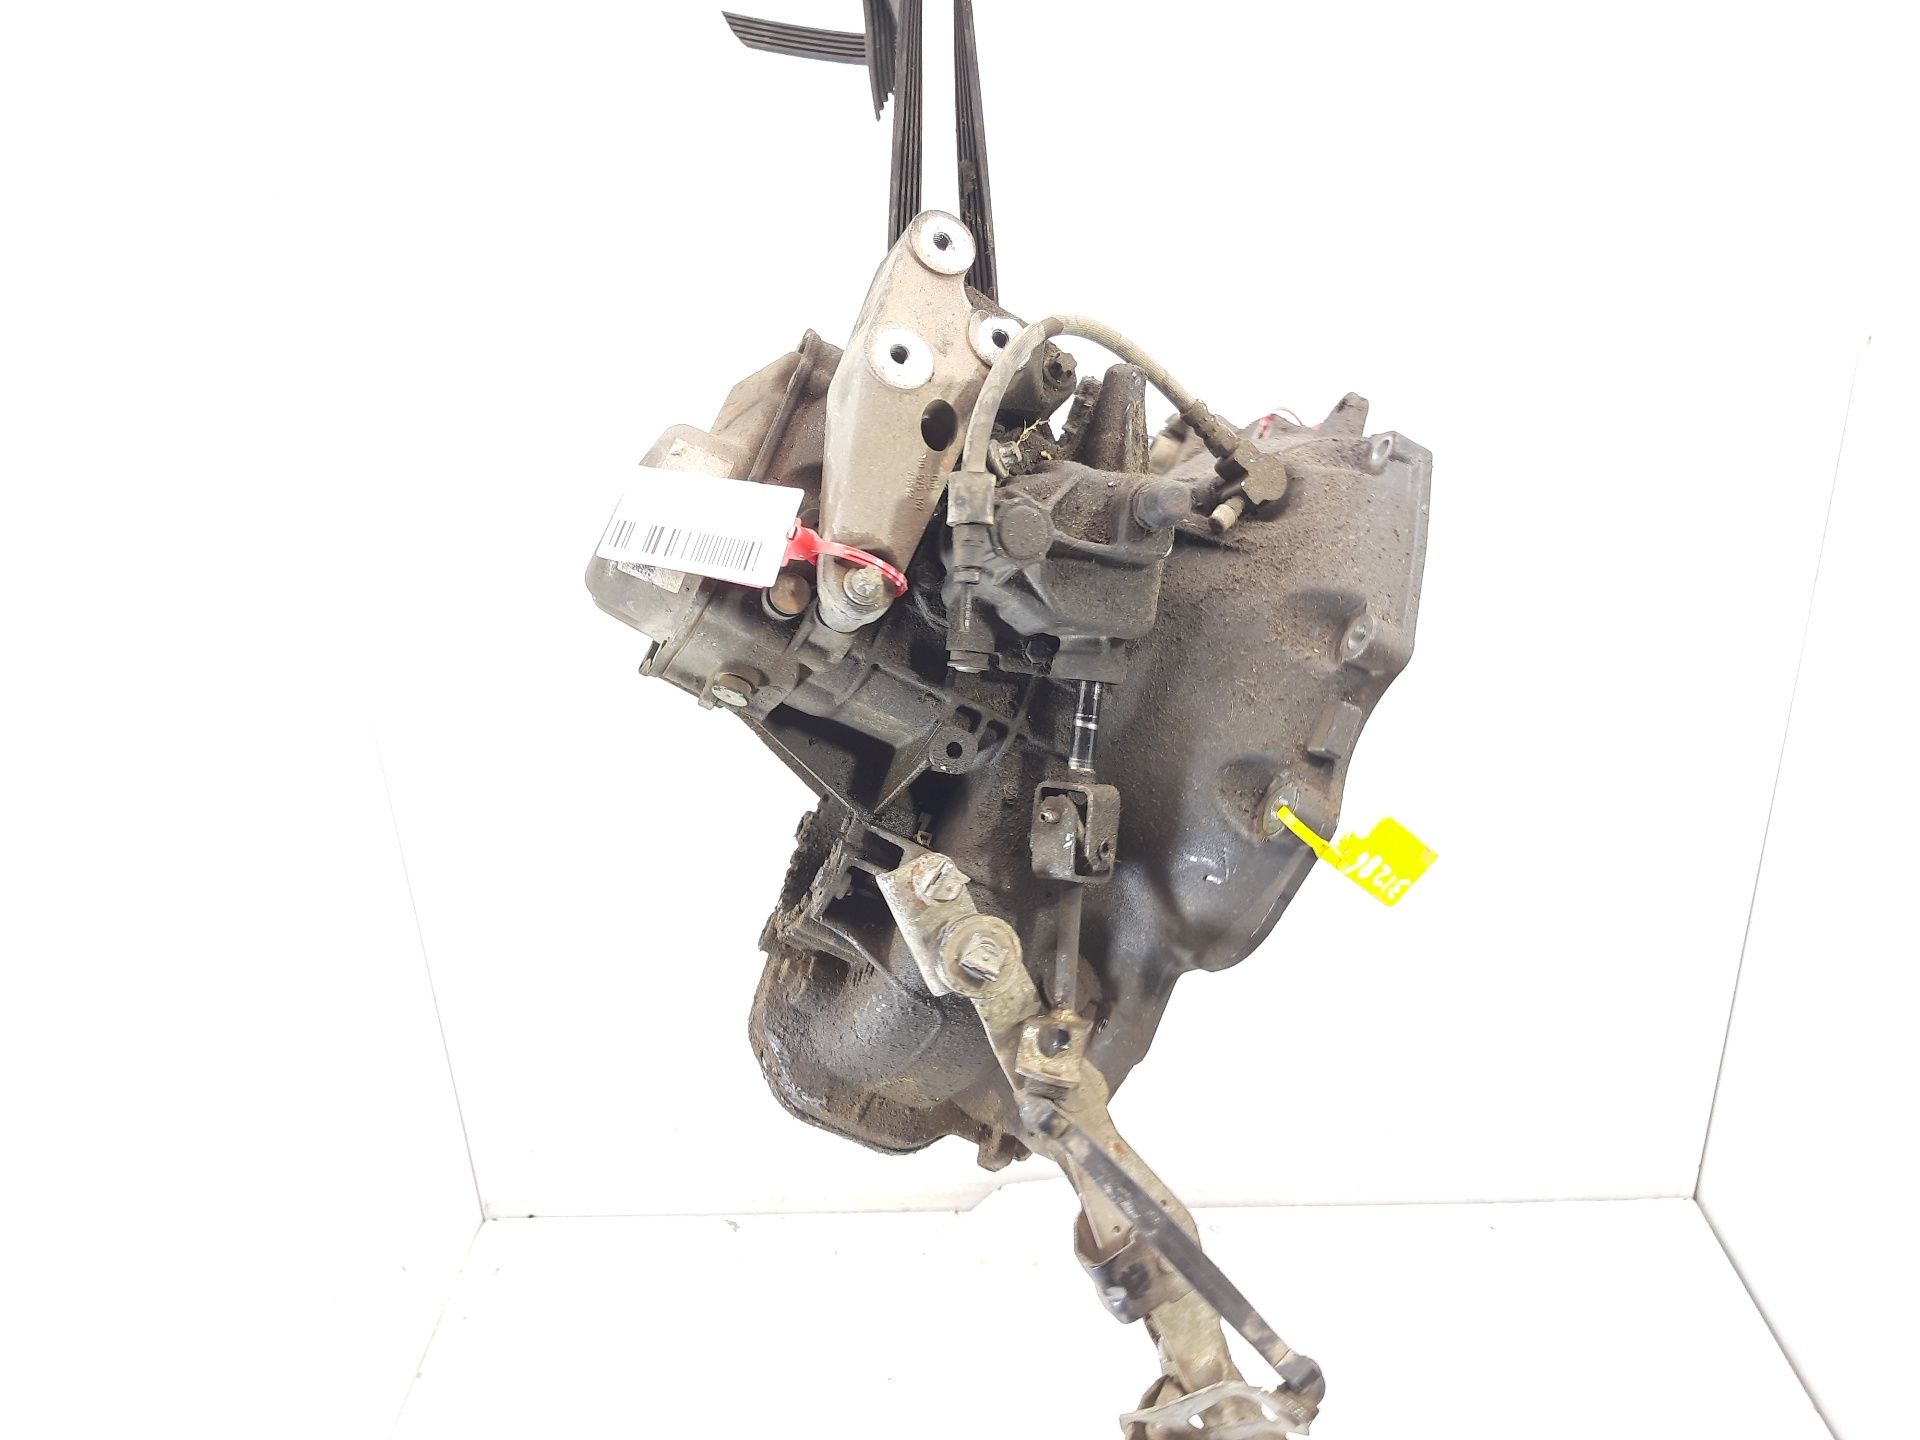 OPEL Astra H (2004-2014) Gearbox F17C374, 5VELOCIDADES 22327126